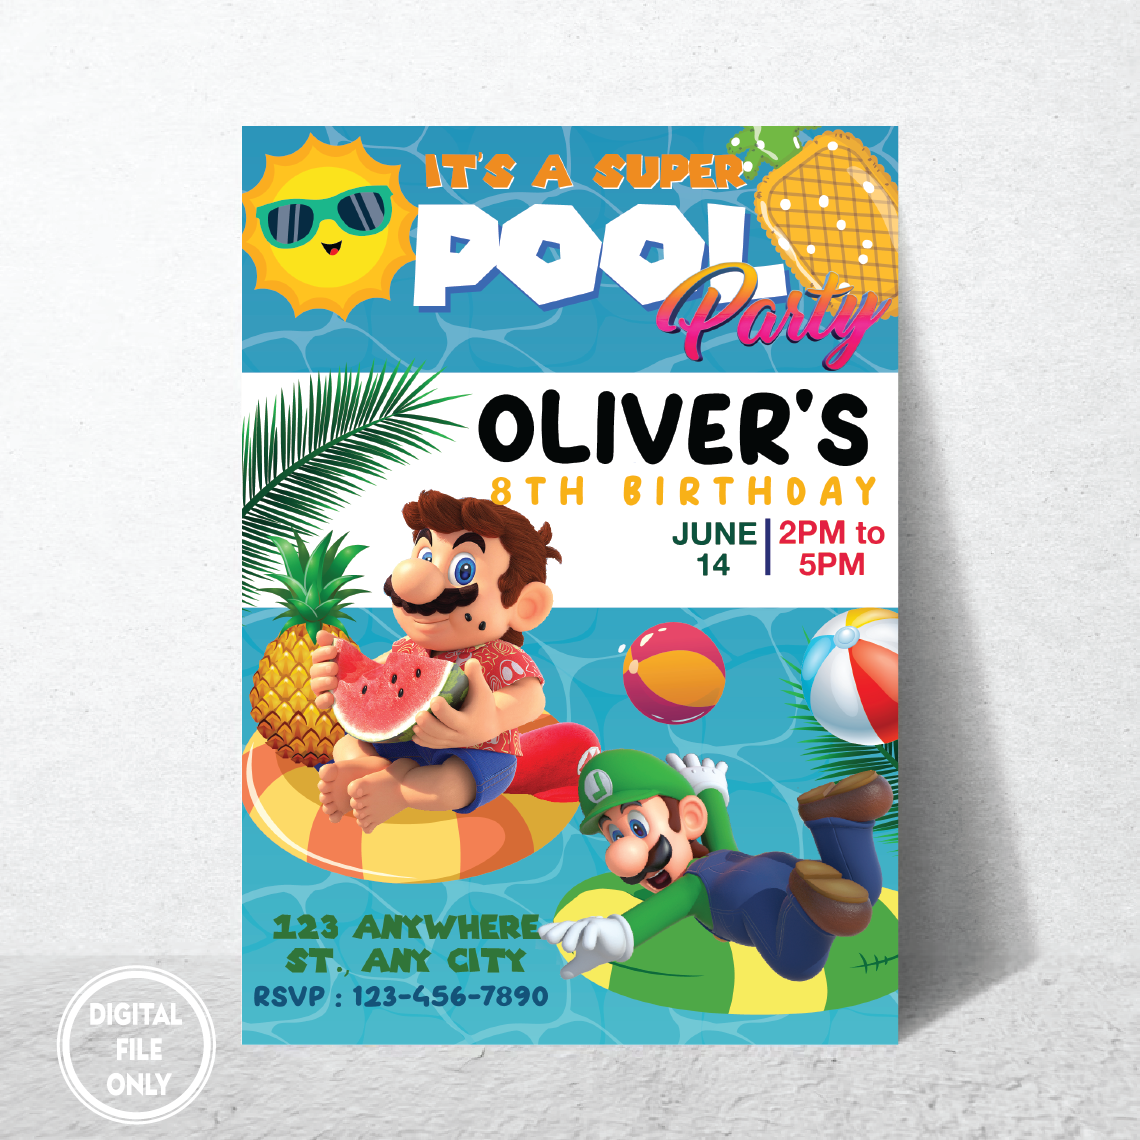 Personalized File Super Mario Birthday Invitation, Mario Party Invite, Pool Party Invitation For Video Gamer,Pool Birthday Boy Kid Party Invite PNG File Only